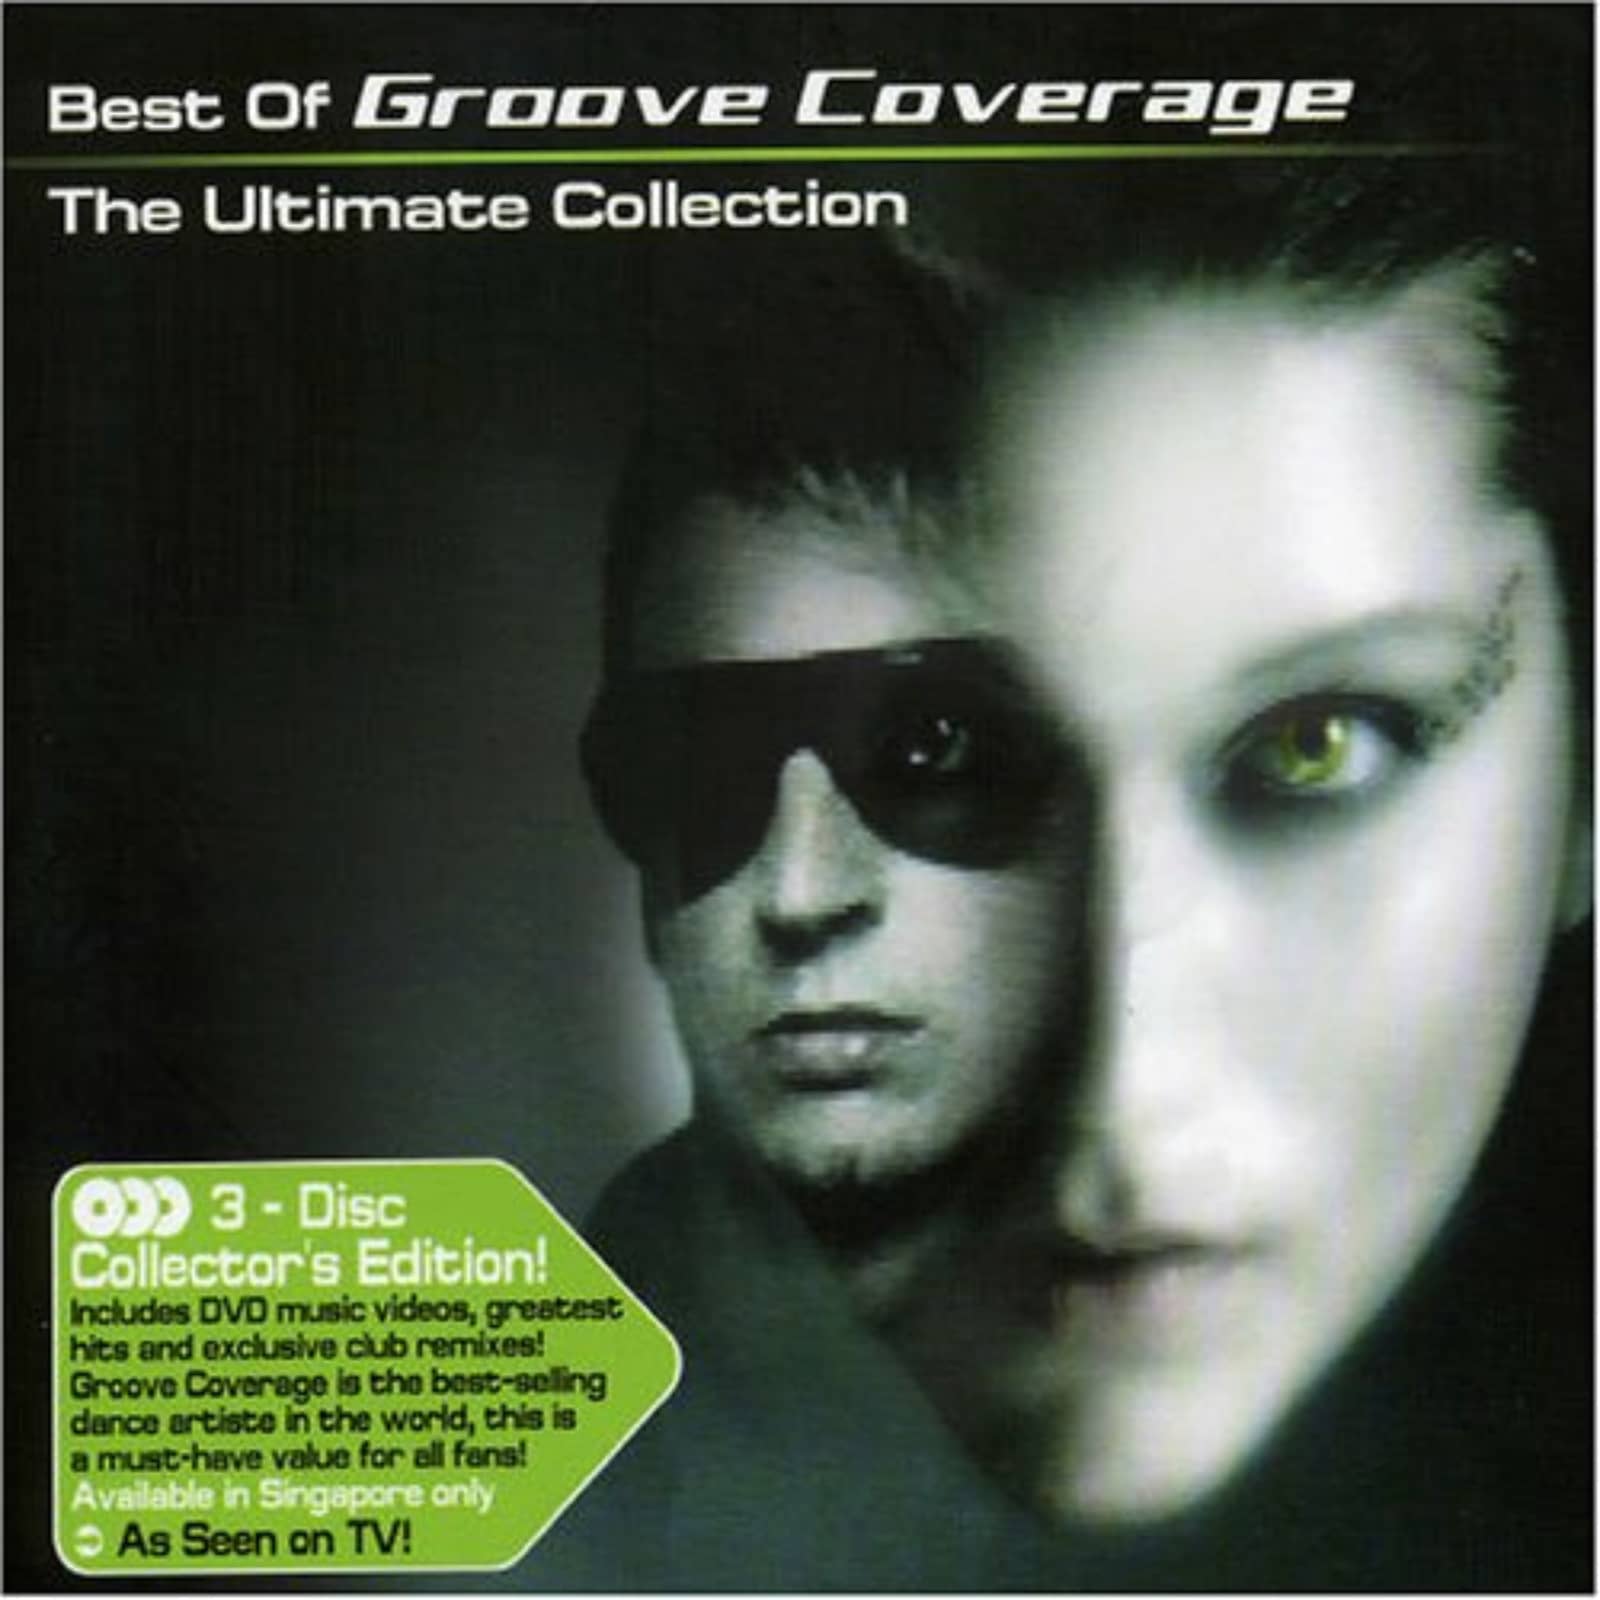 poison techno remix groove coverage torrent